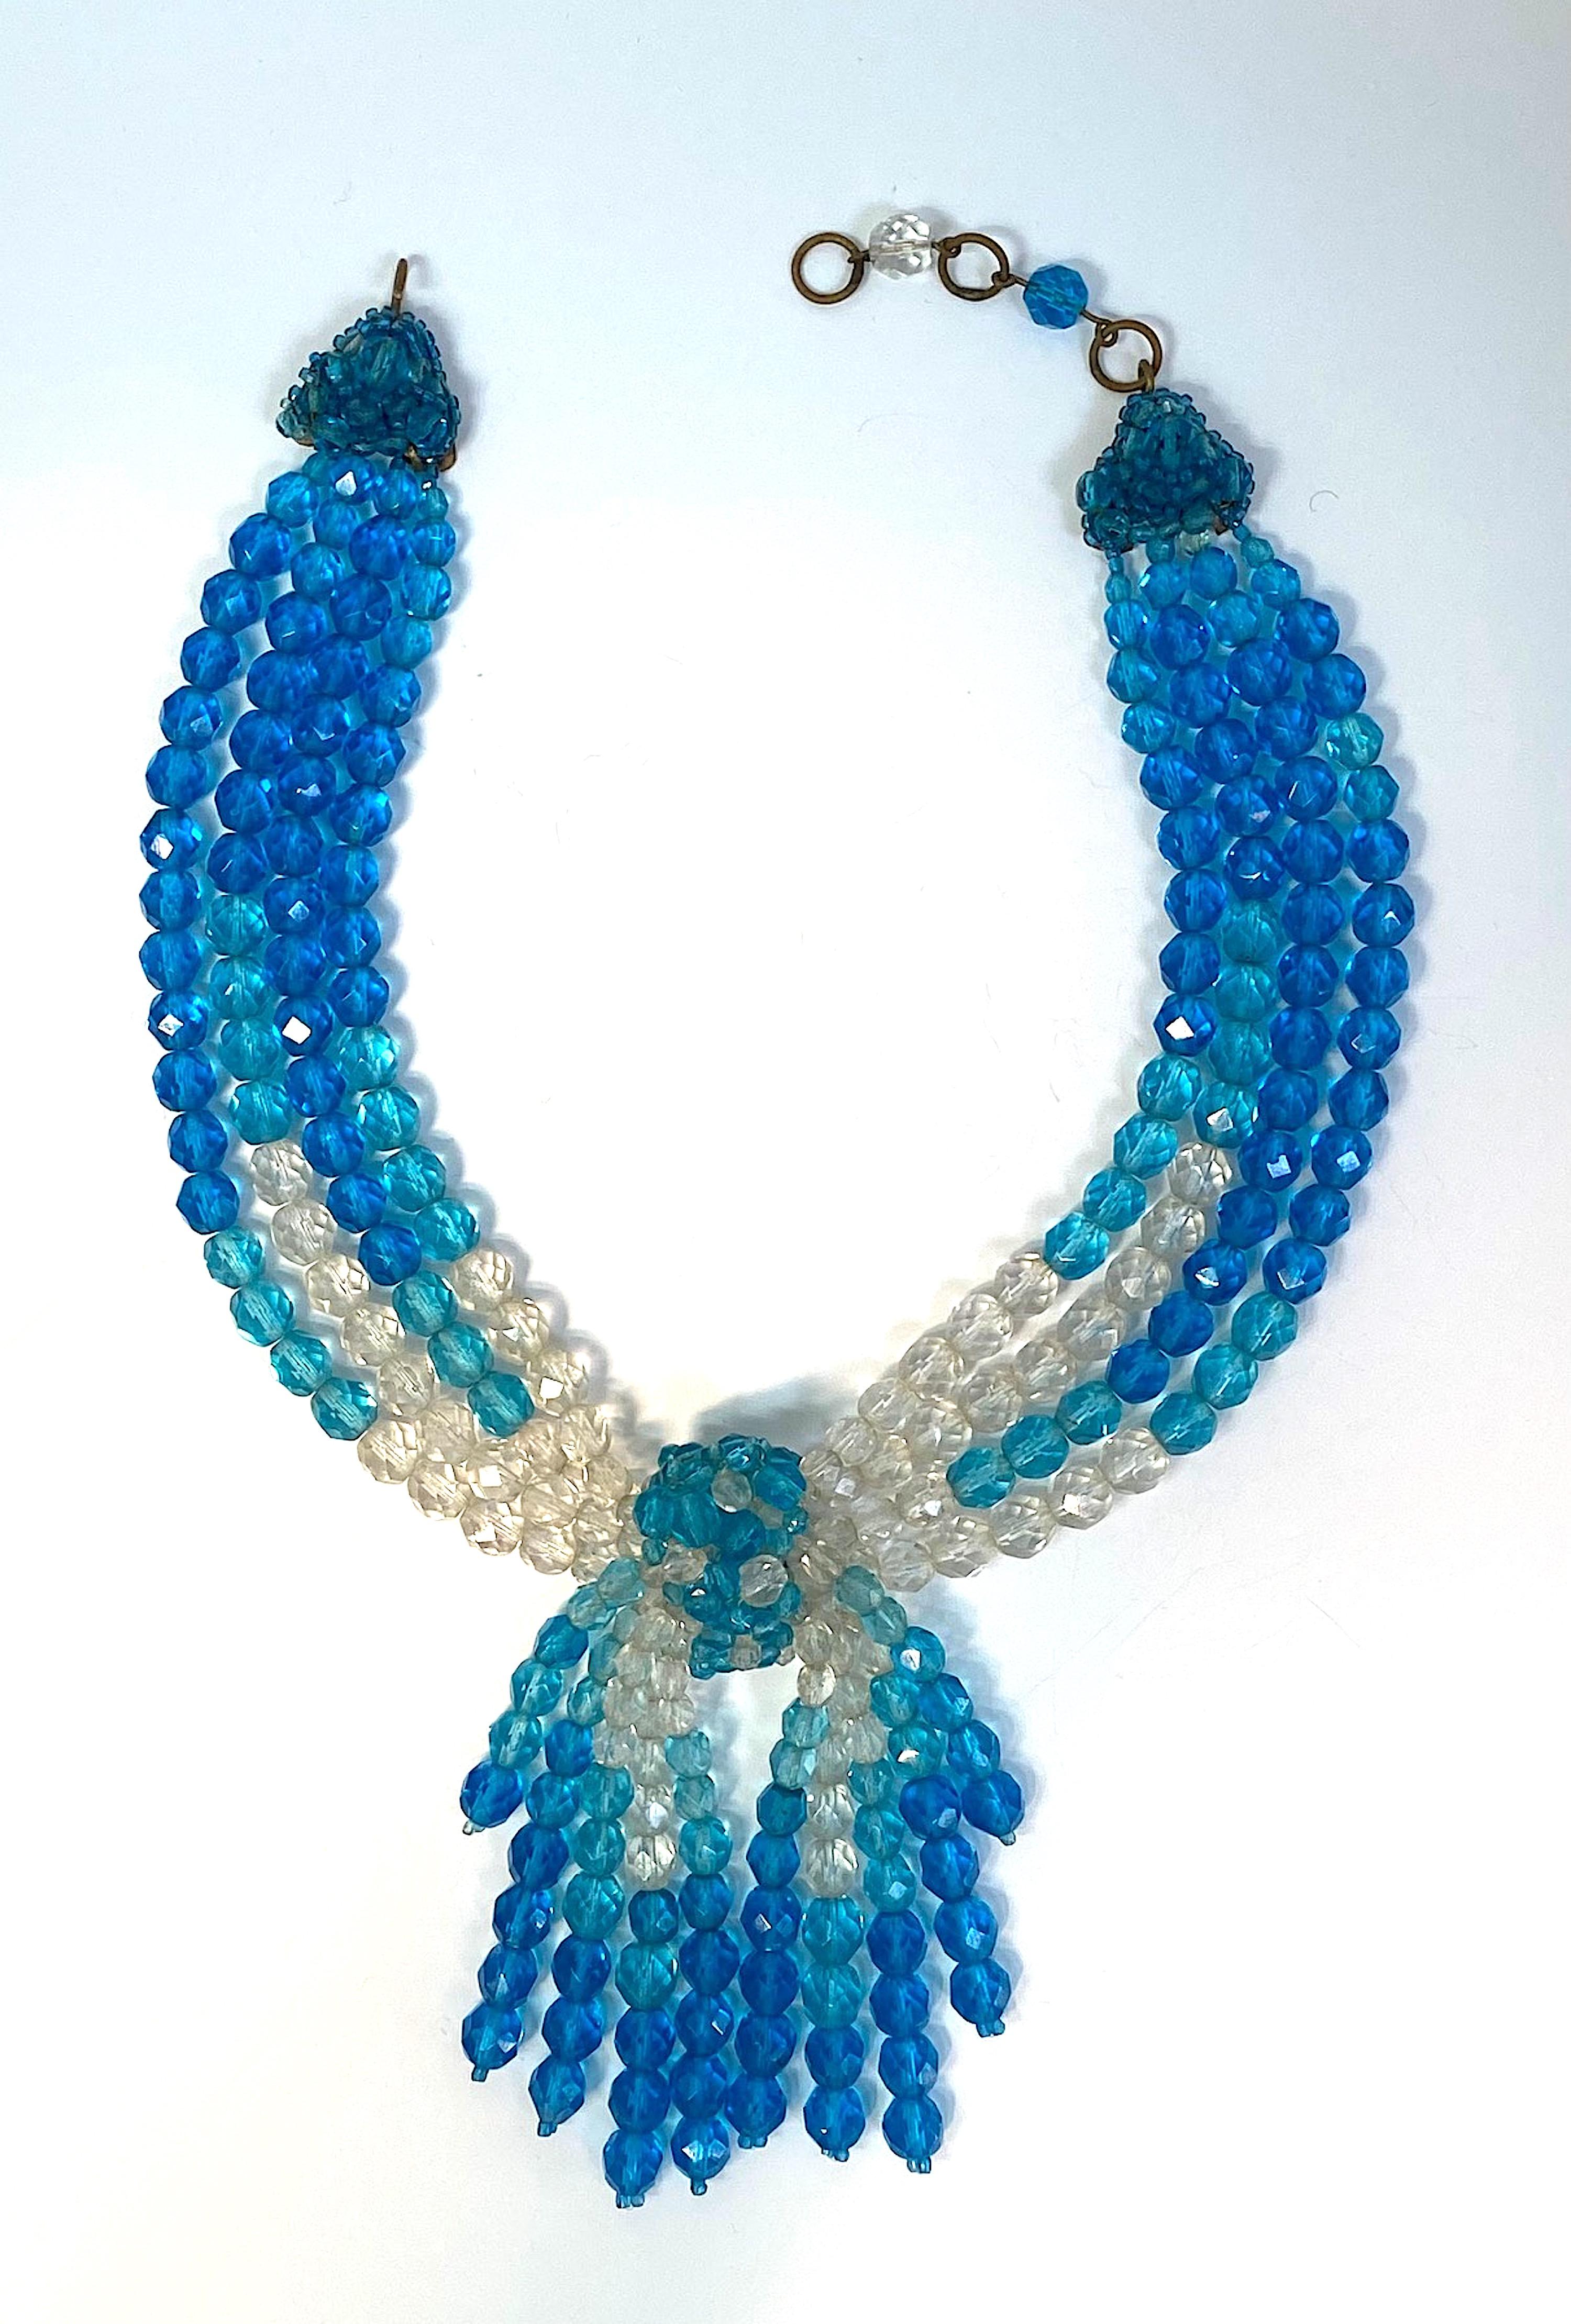 Women's Coppola e Topo Clear & Blue Crystal Beads 1950s Fringe Necklace